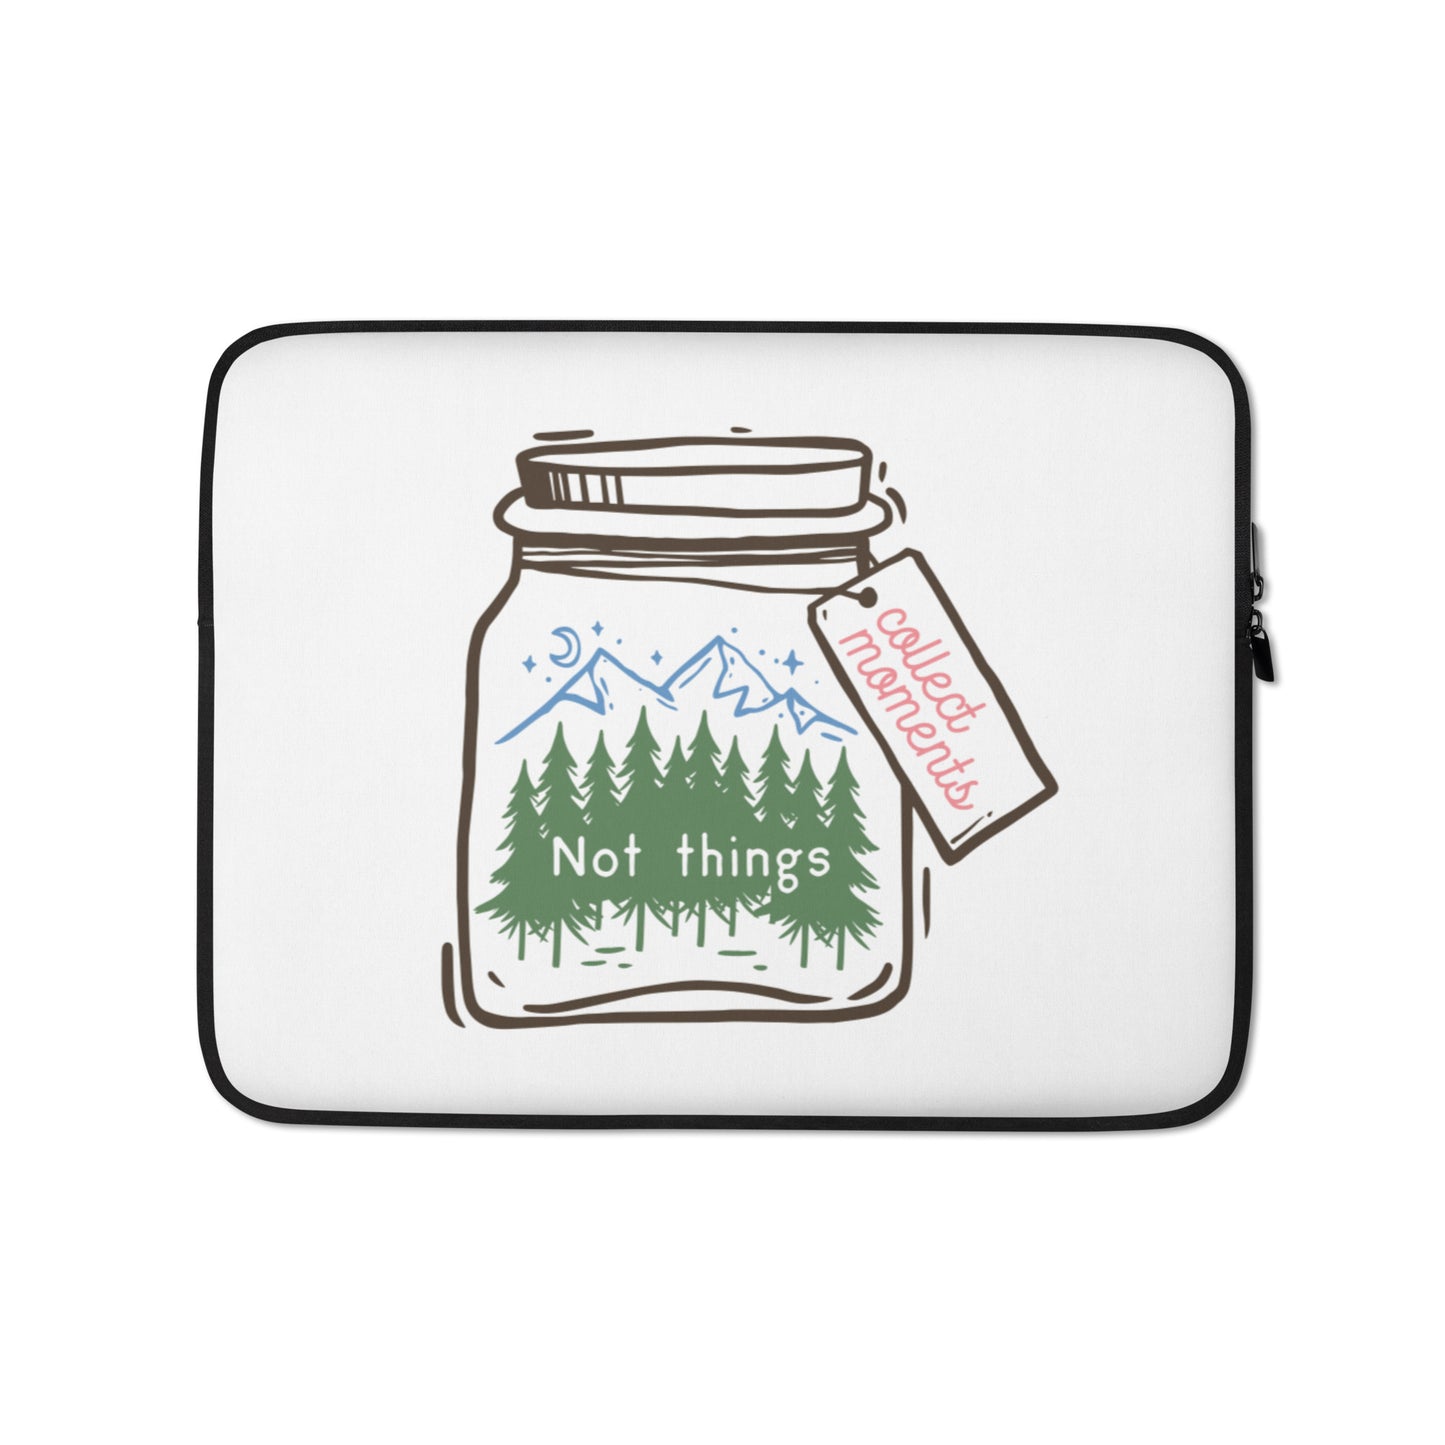 Collect Moments Not Things Laptop Sleeve